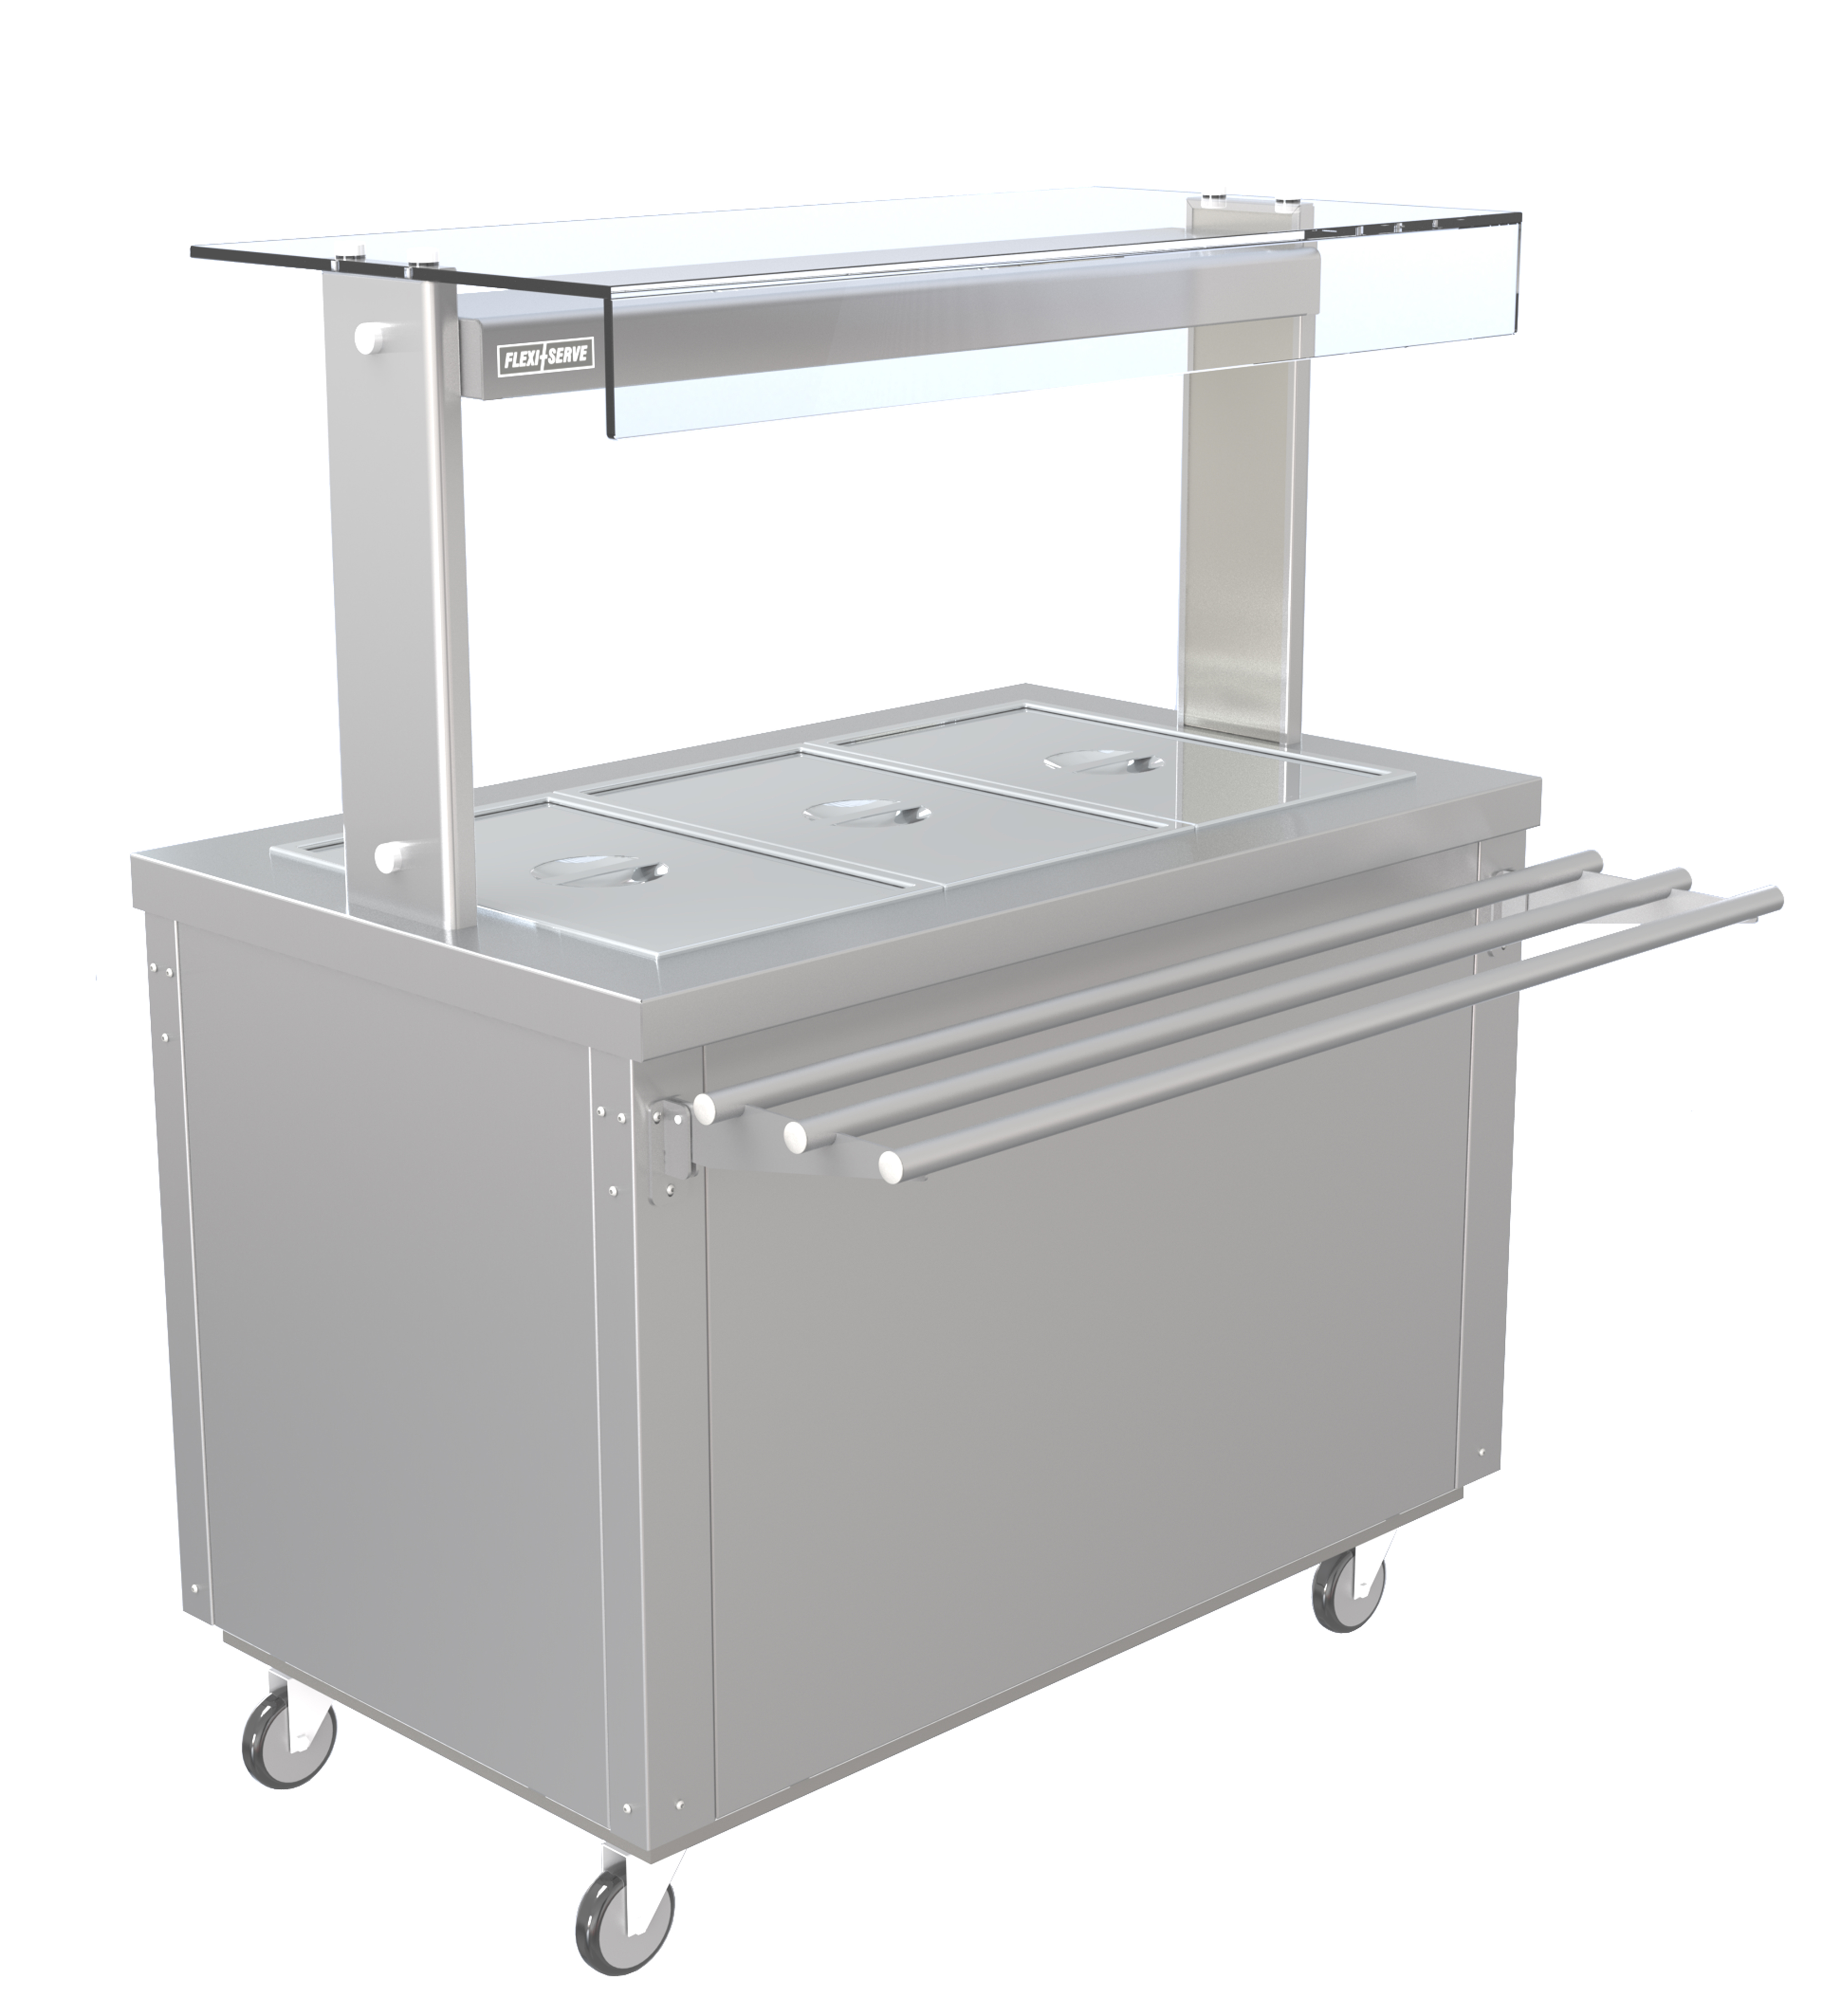 Parry FS-AW3 - Flexi Serve Ambient Cupboard with Chilled Well